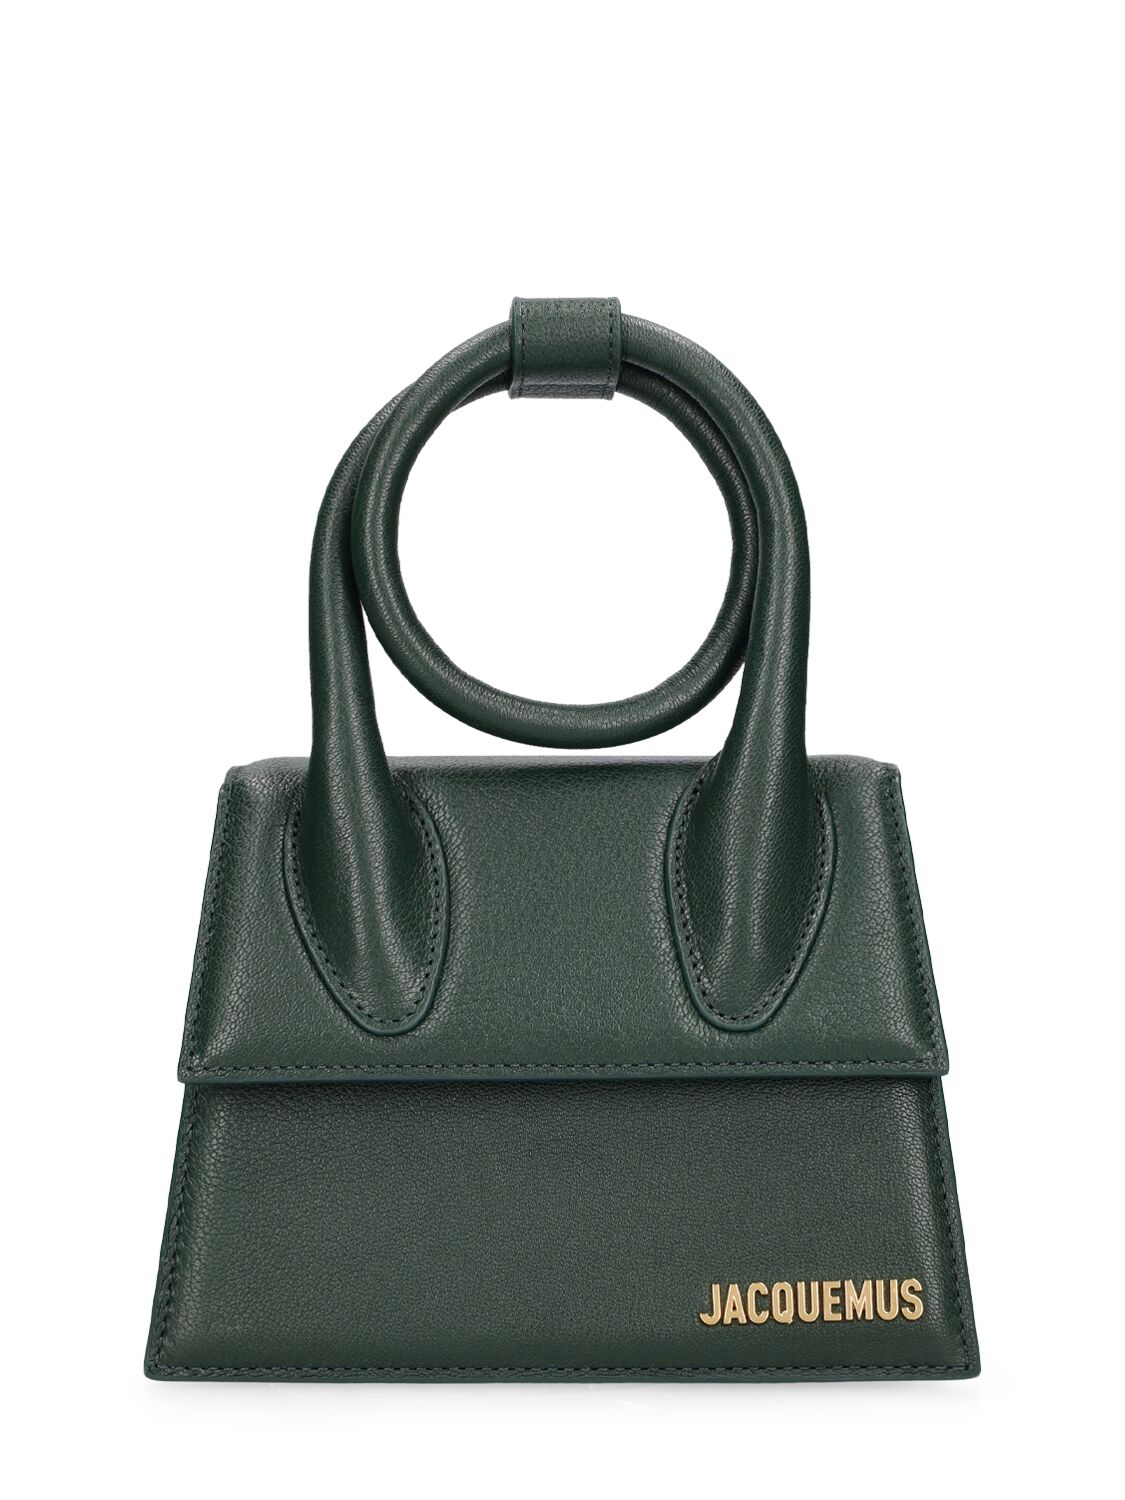 Jacquemus Le Chiquito Noeud Leather Top Handle Bag In Green